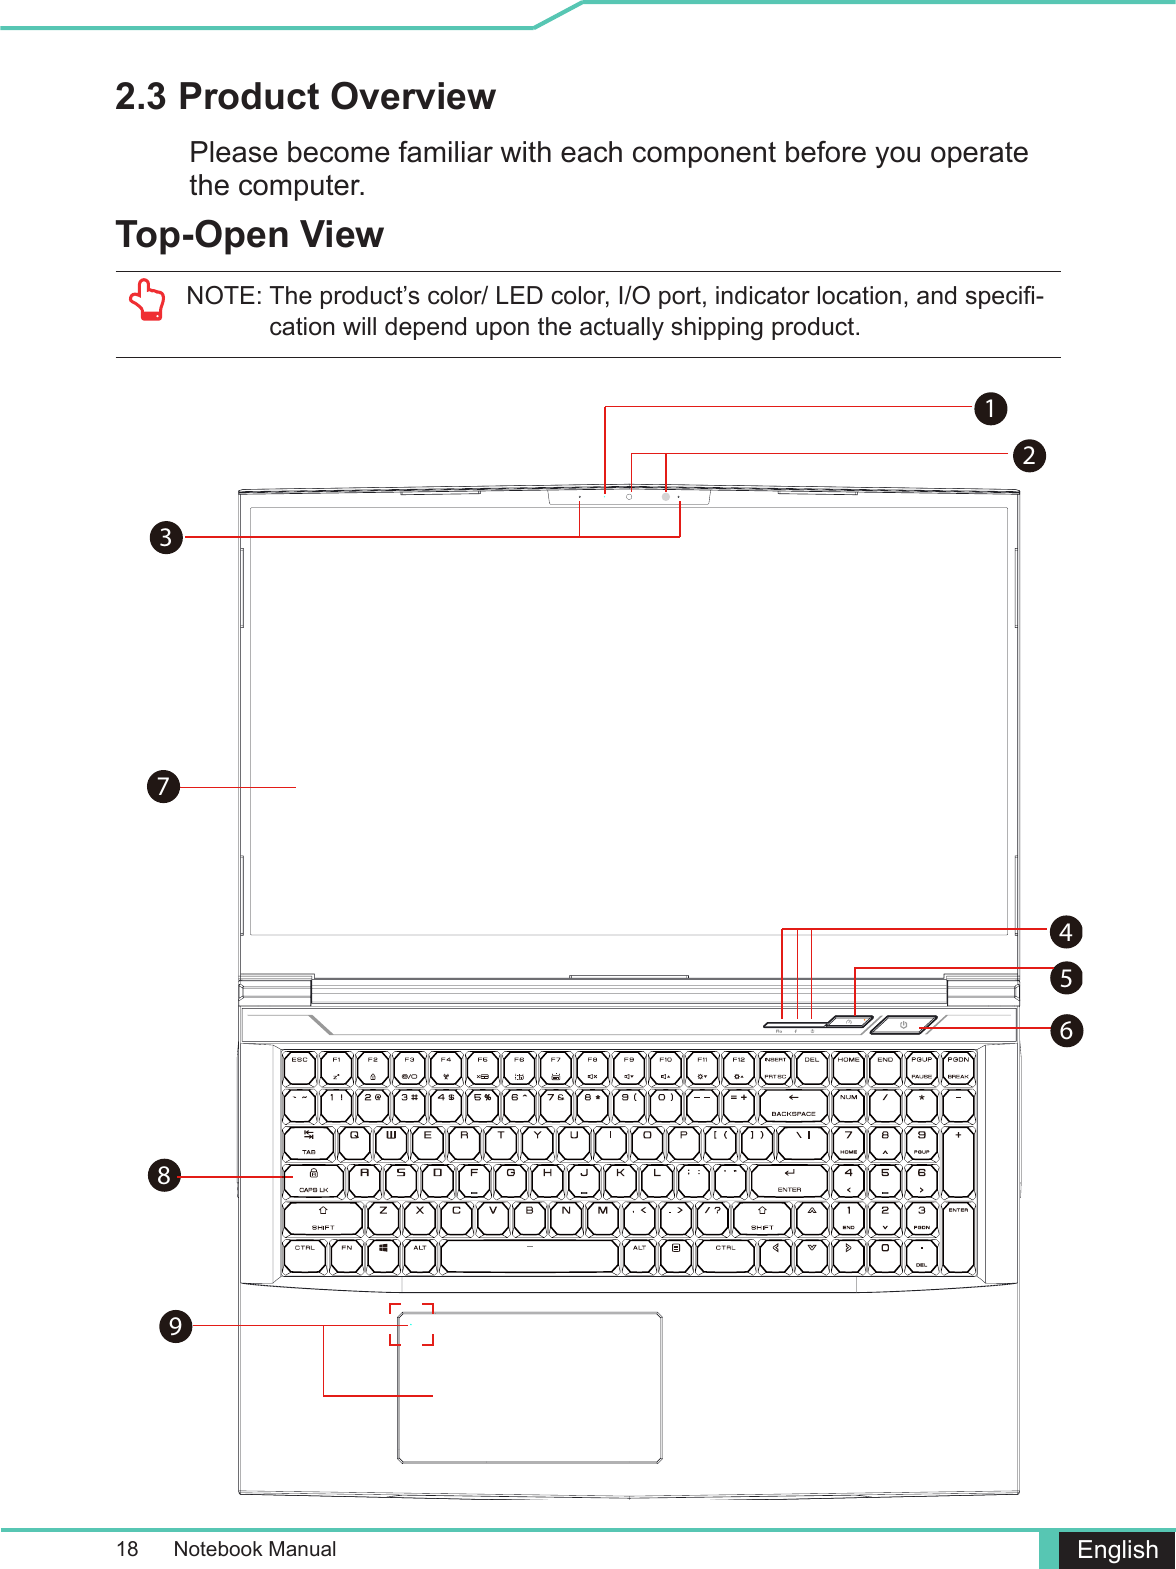 18      Notebook Manual EnglishTop-Open View 2.3 Product Overview Please become familiar with each component before you operate the computer.cation will depend upon the actually shipping product.125374896